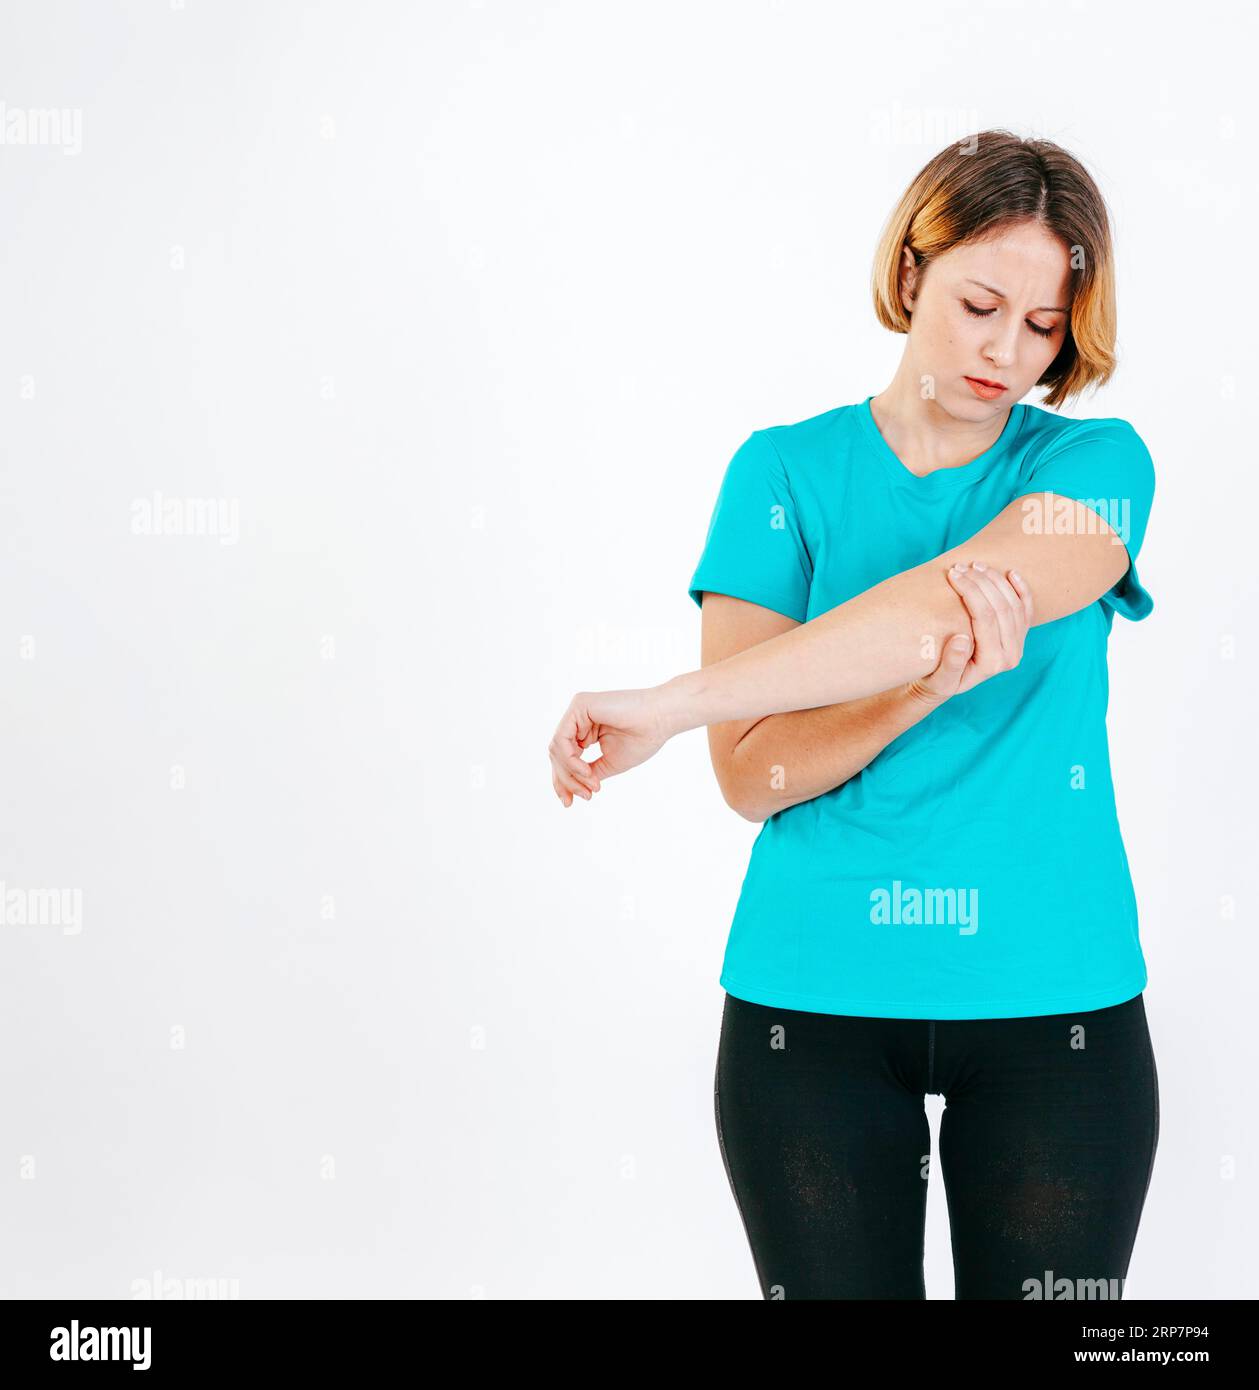 Pretty woman with hurting elbow Stock Photo